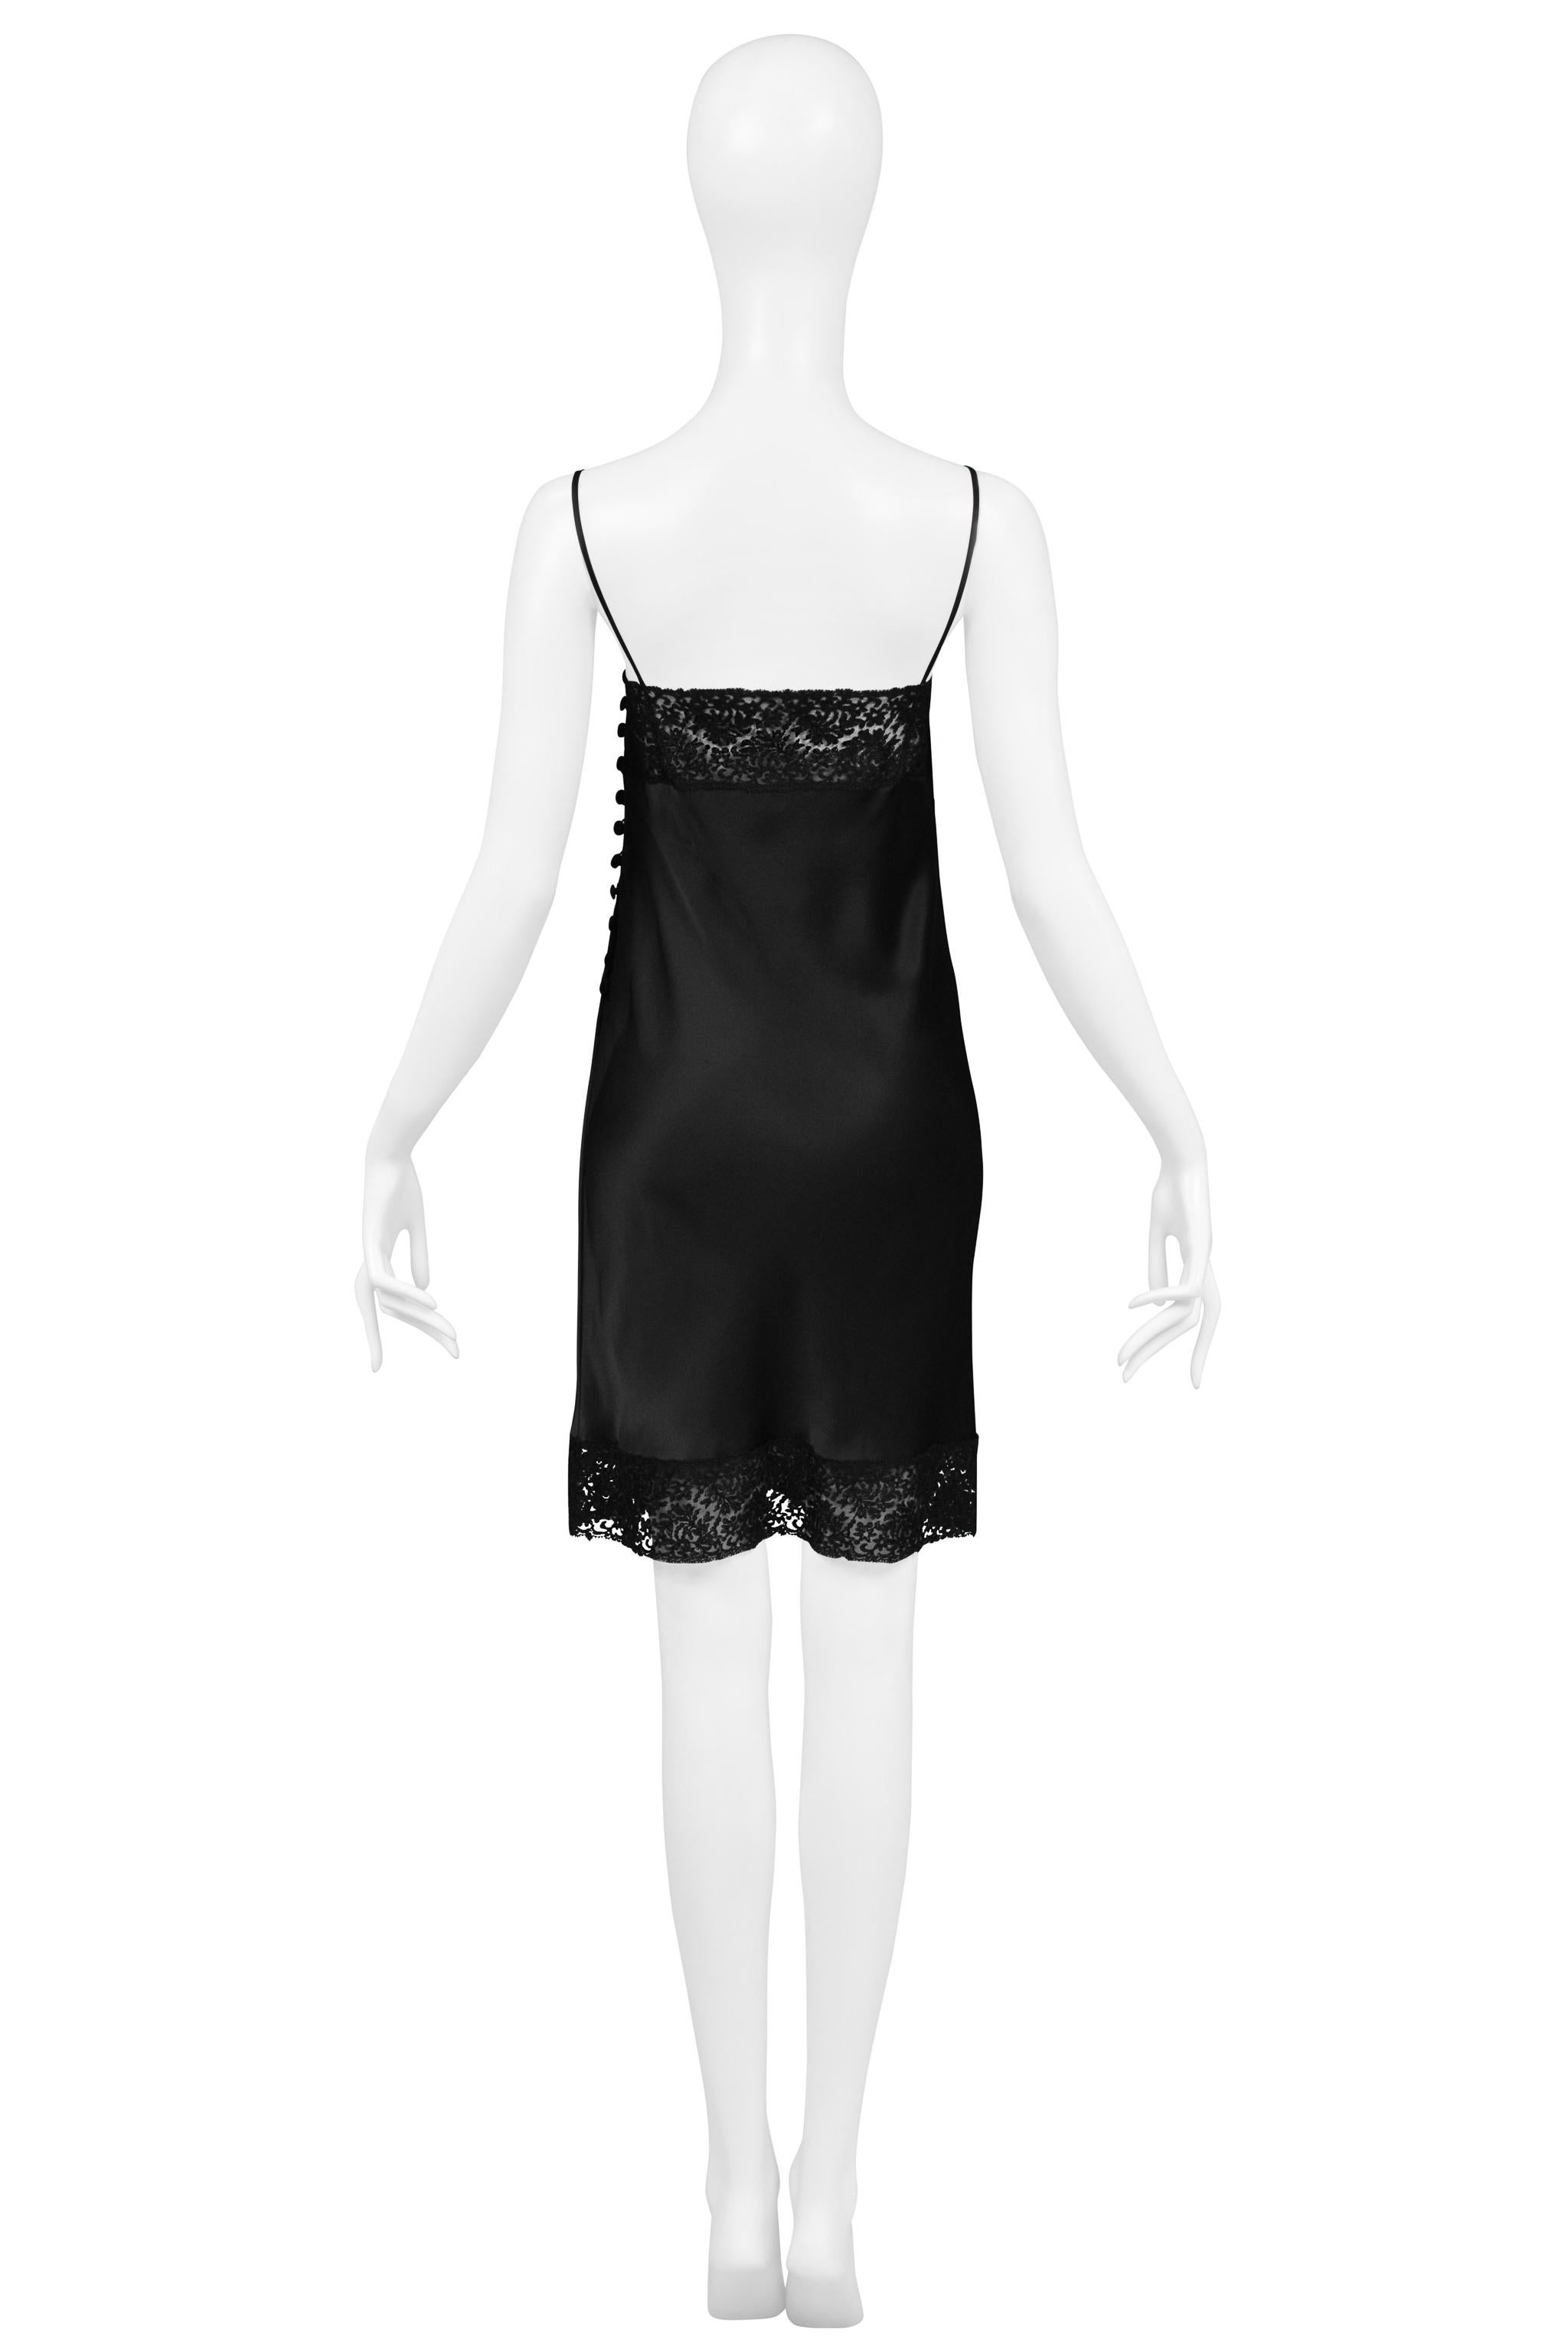 Christian Dior By John Galliano Black Silk And Lace Slip Dress 1997 For Sale 5